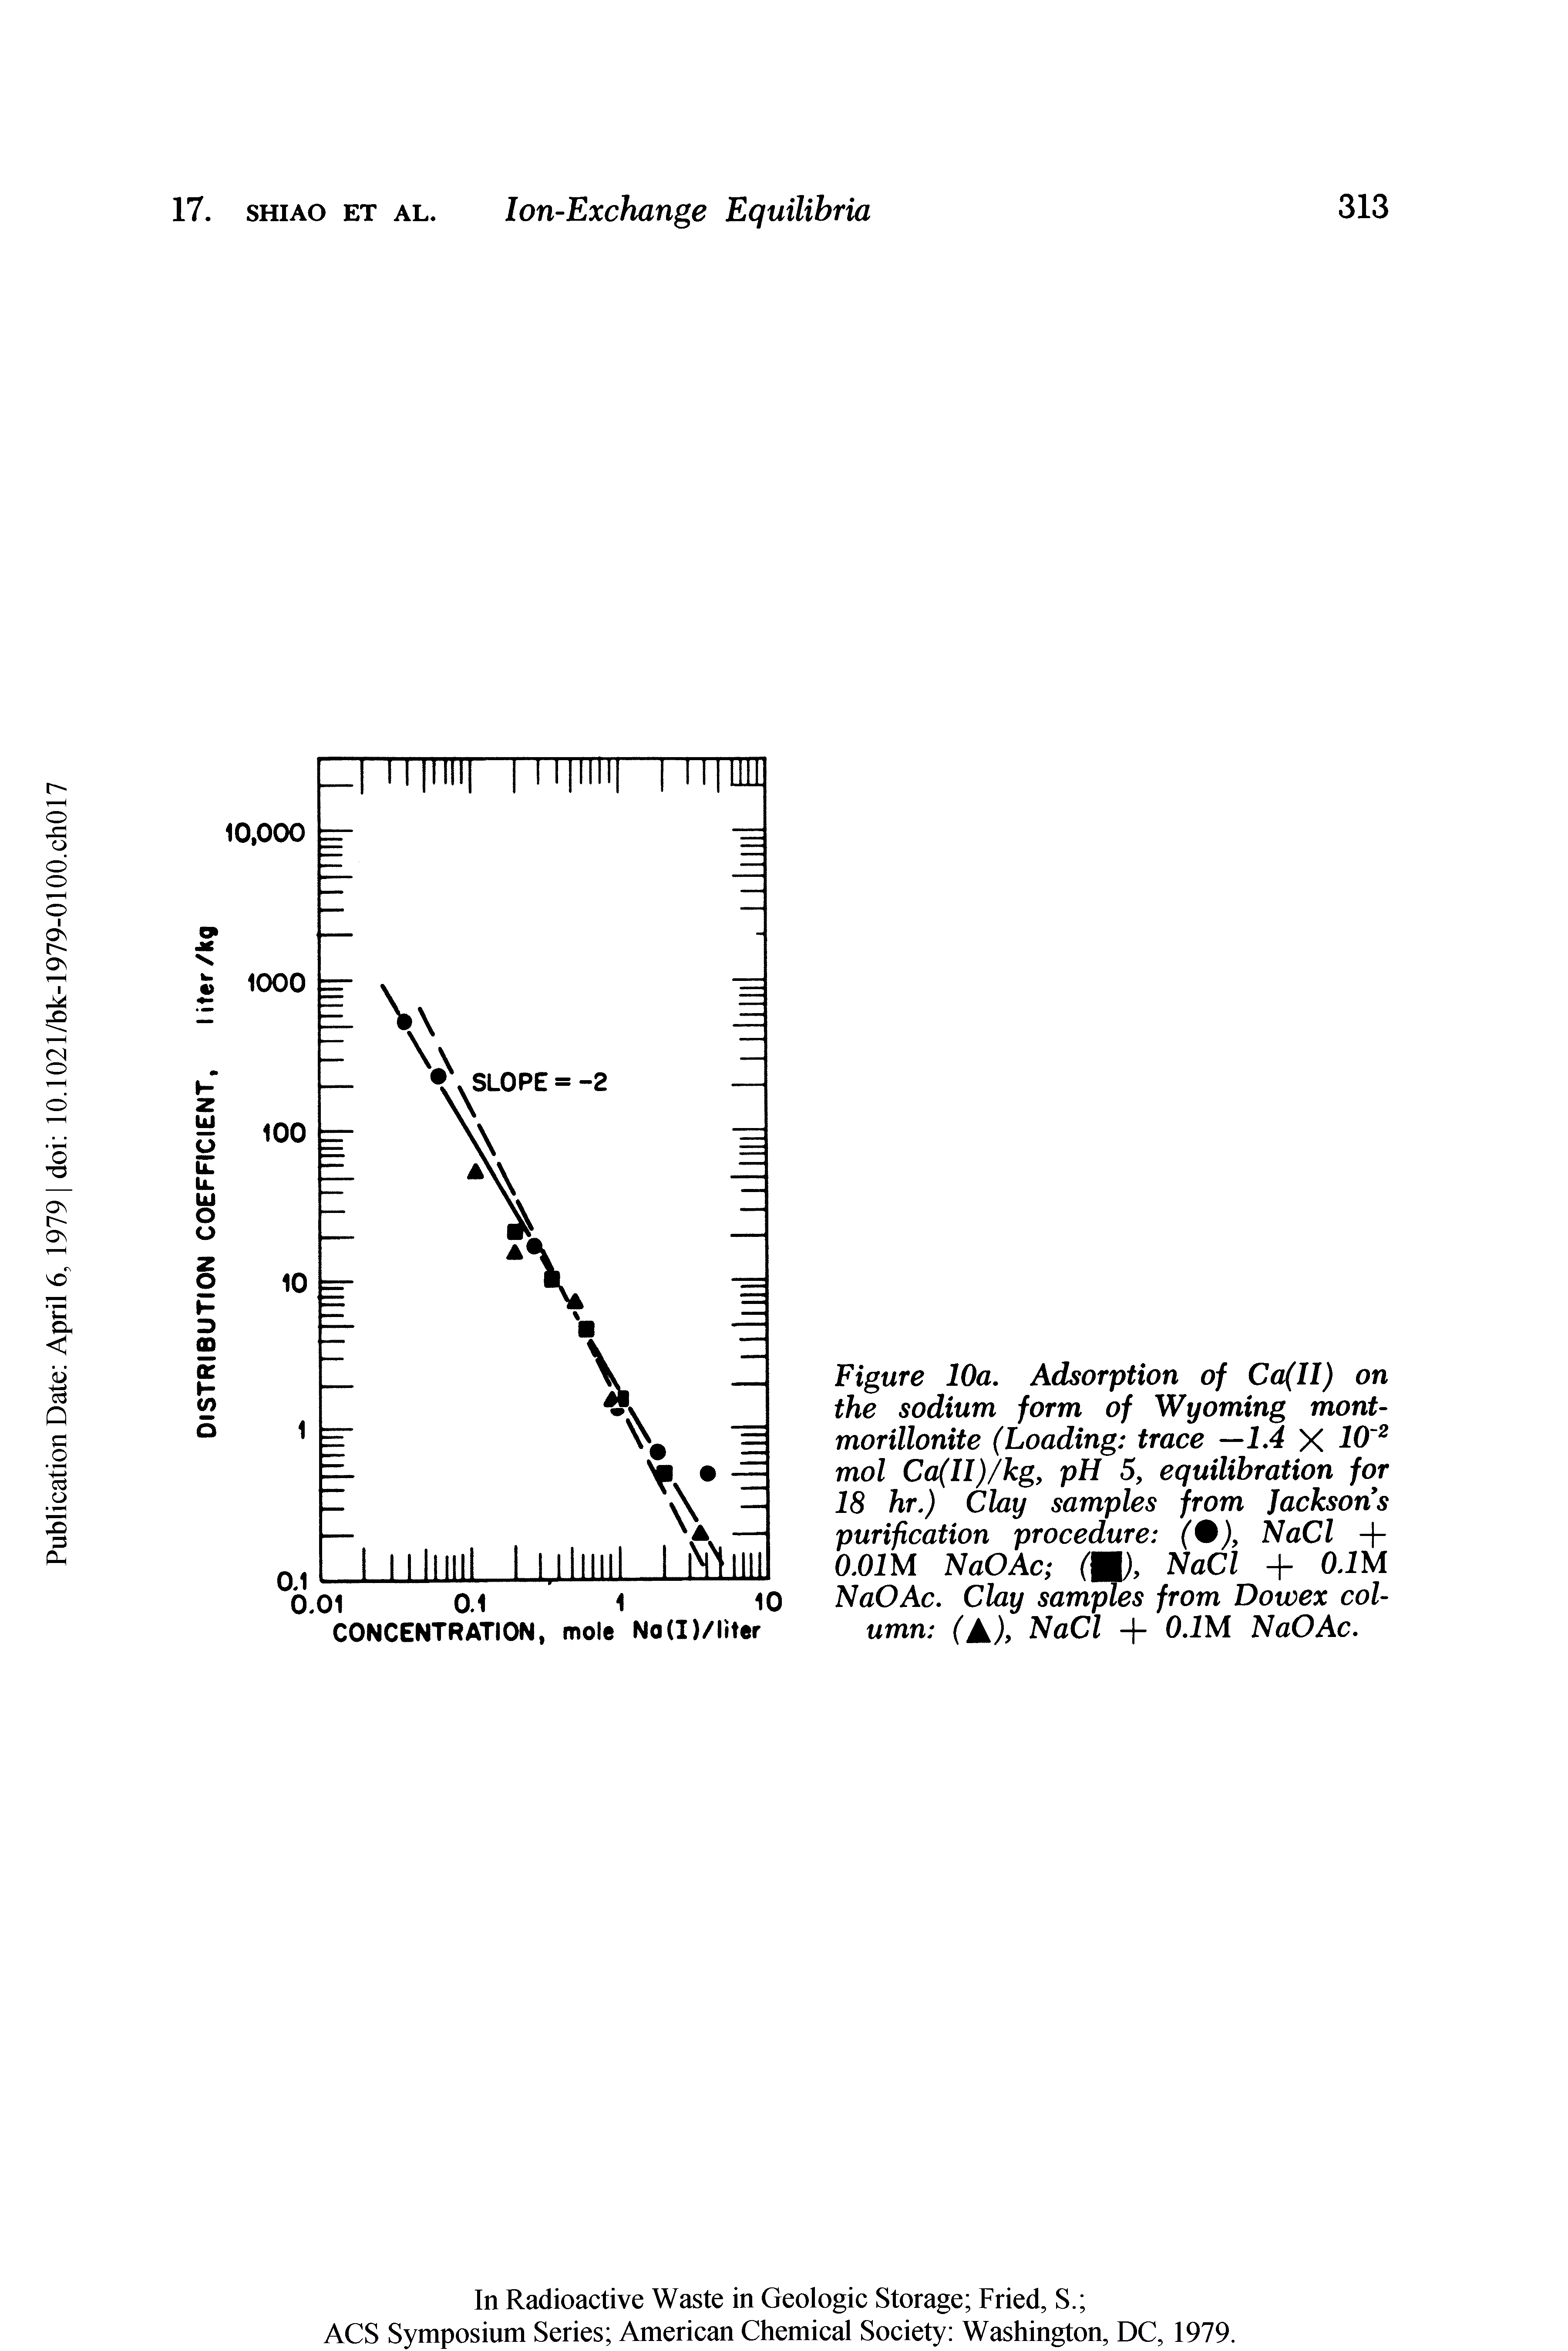 Figure 10a. Adsorption of Ca(II) on the sodium form of Wyoming montmorillonite (Loading trace —1.4 X 10 mol Ca(ll)/kg, pH 5, equilibration for 18 hr.) Clay samples from Jacksons purification procedure ( ), NaCl + O.OIM NaOAc M, NaCl + O.IM NaOAc. Clay sarnies from Dowex column ( ), NaCl + O.IM NaOAc.